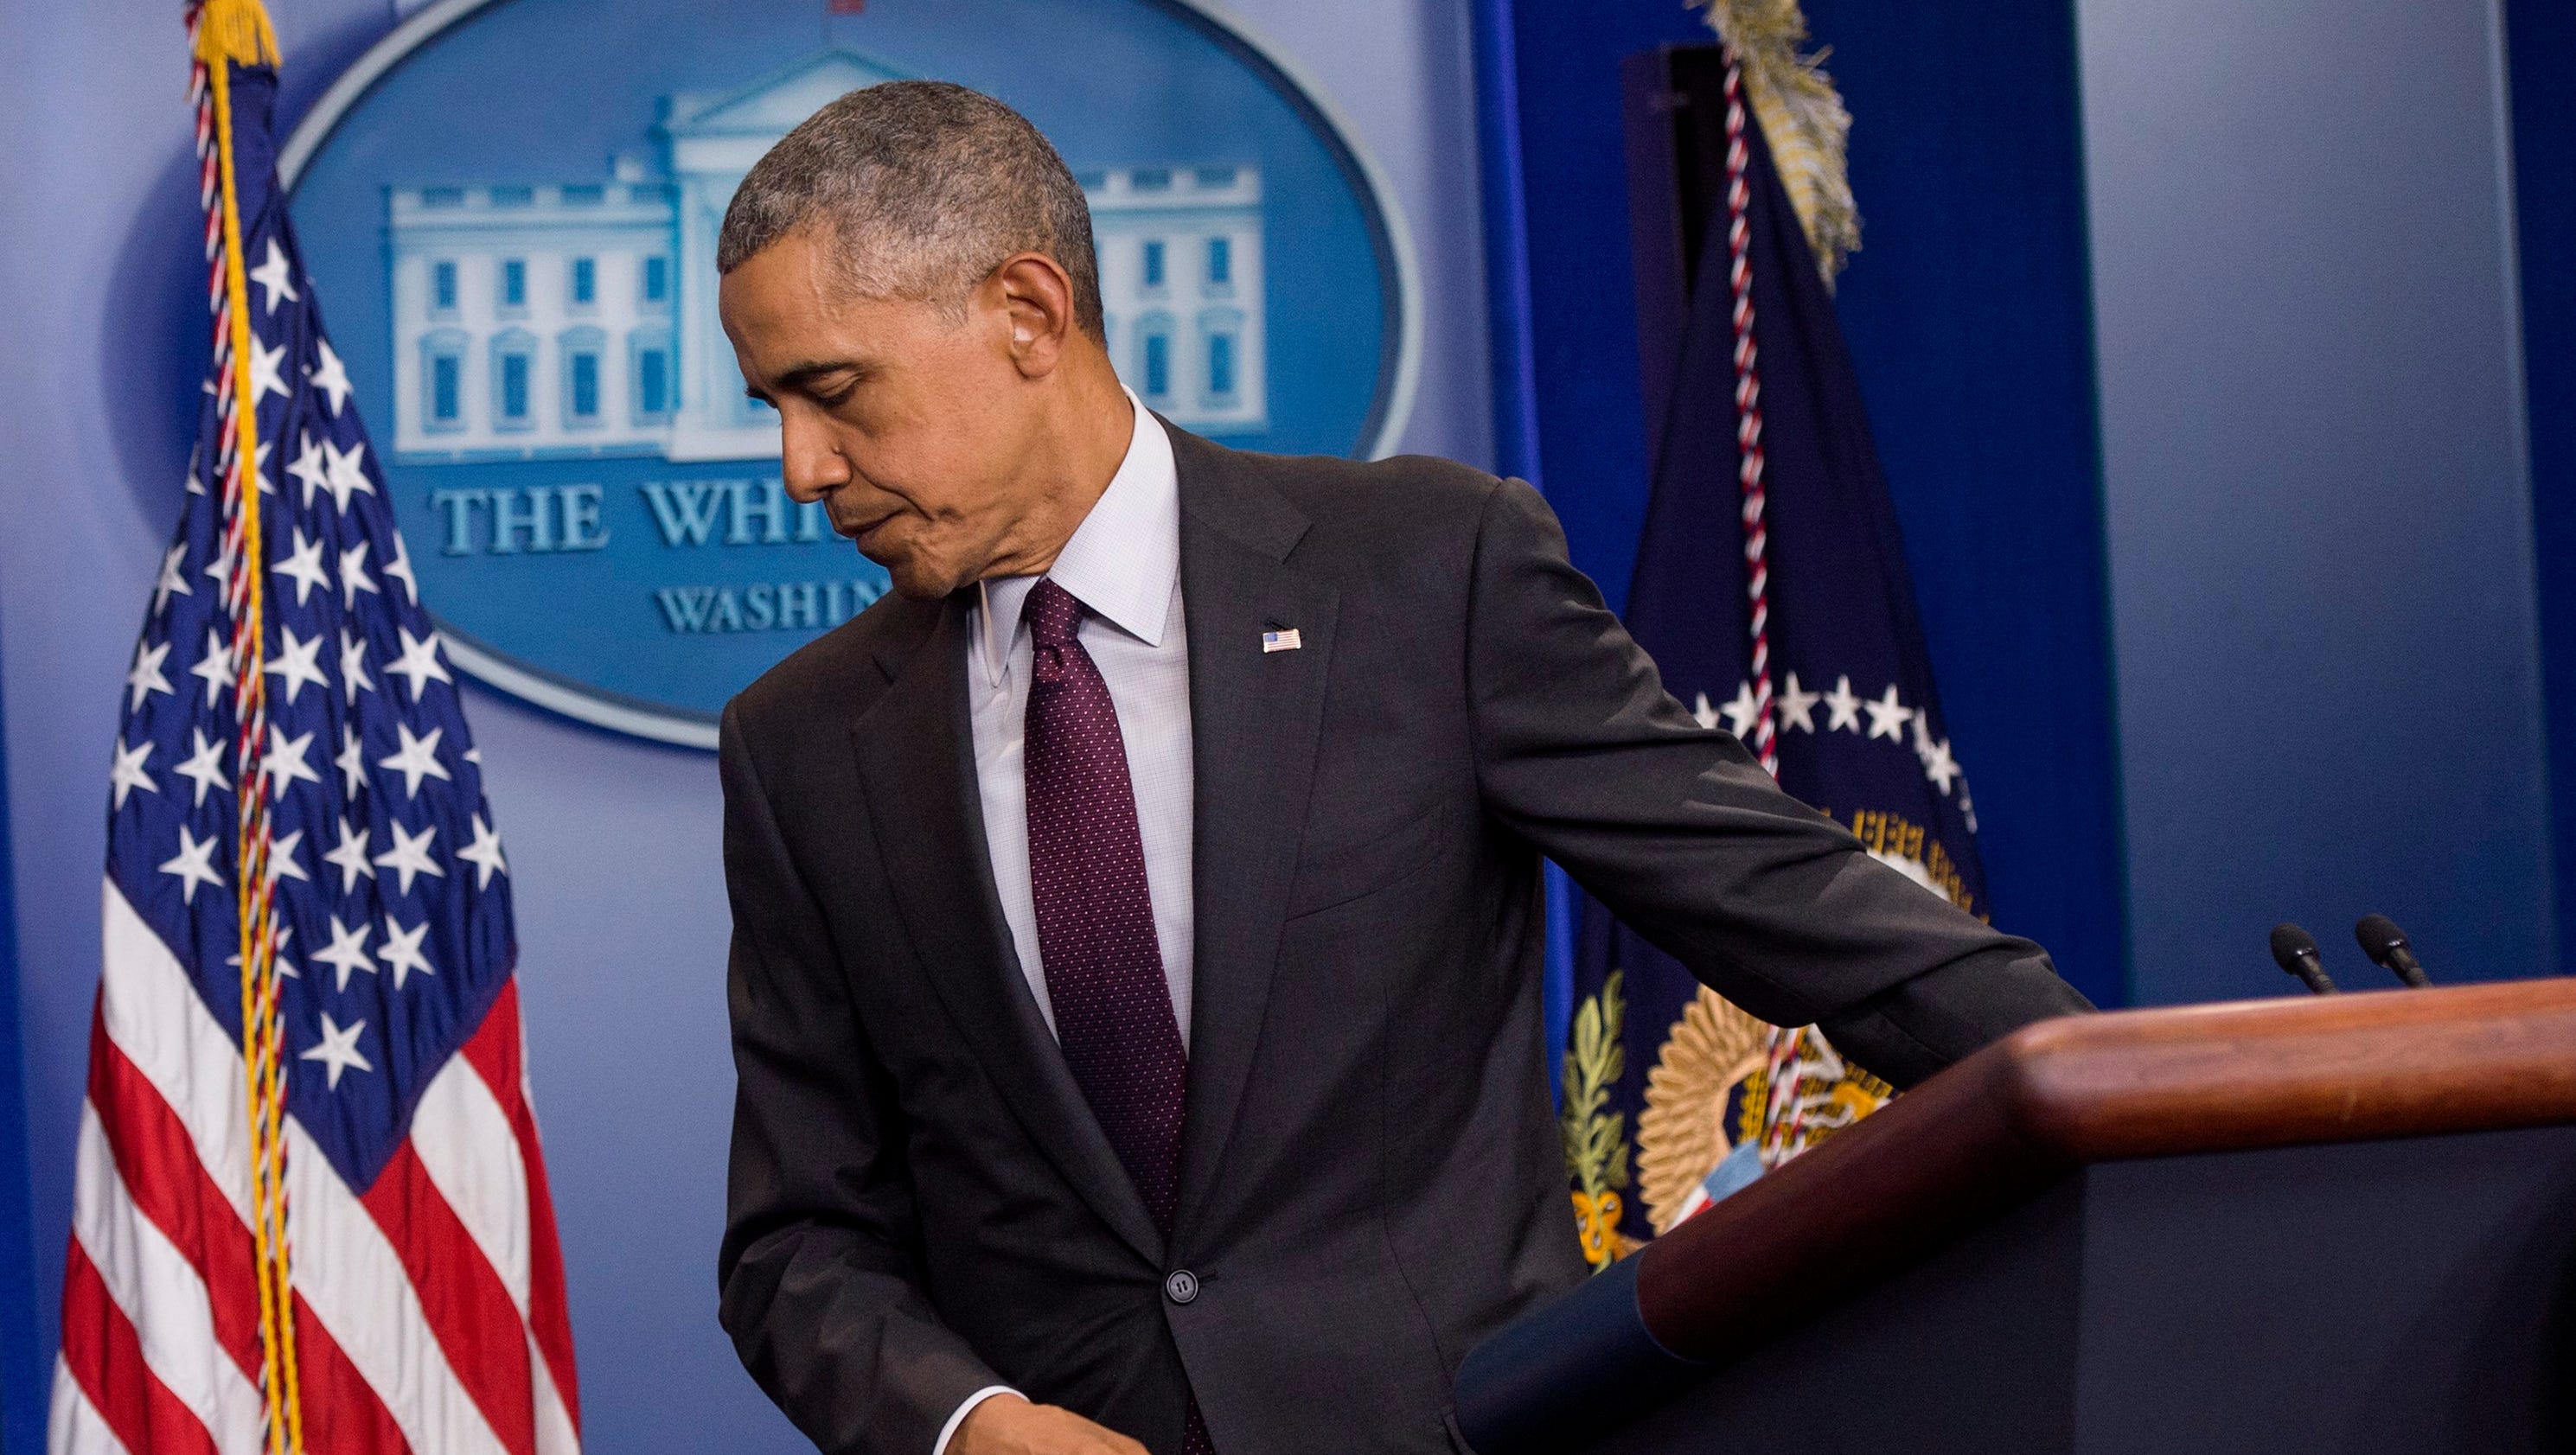 11 mass shootings, 11 speeches: How Obama has responded